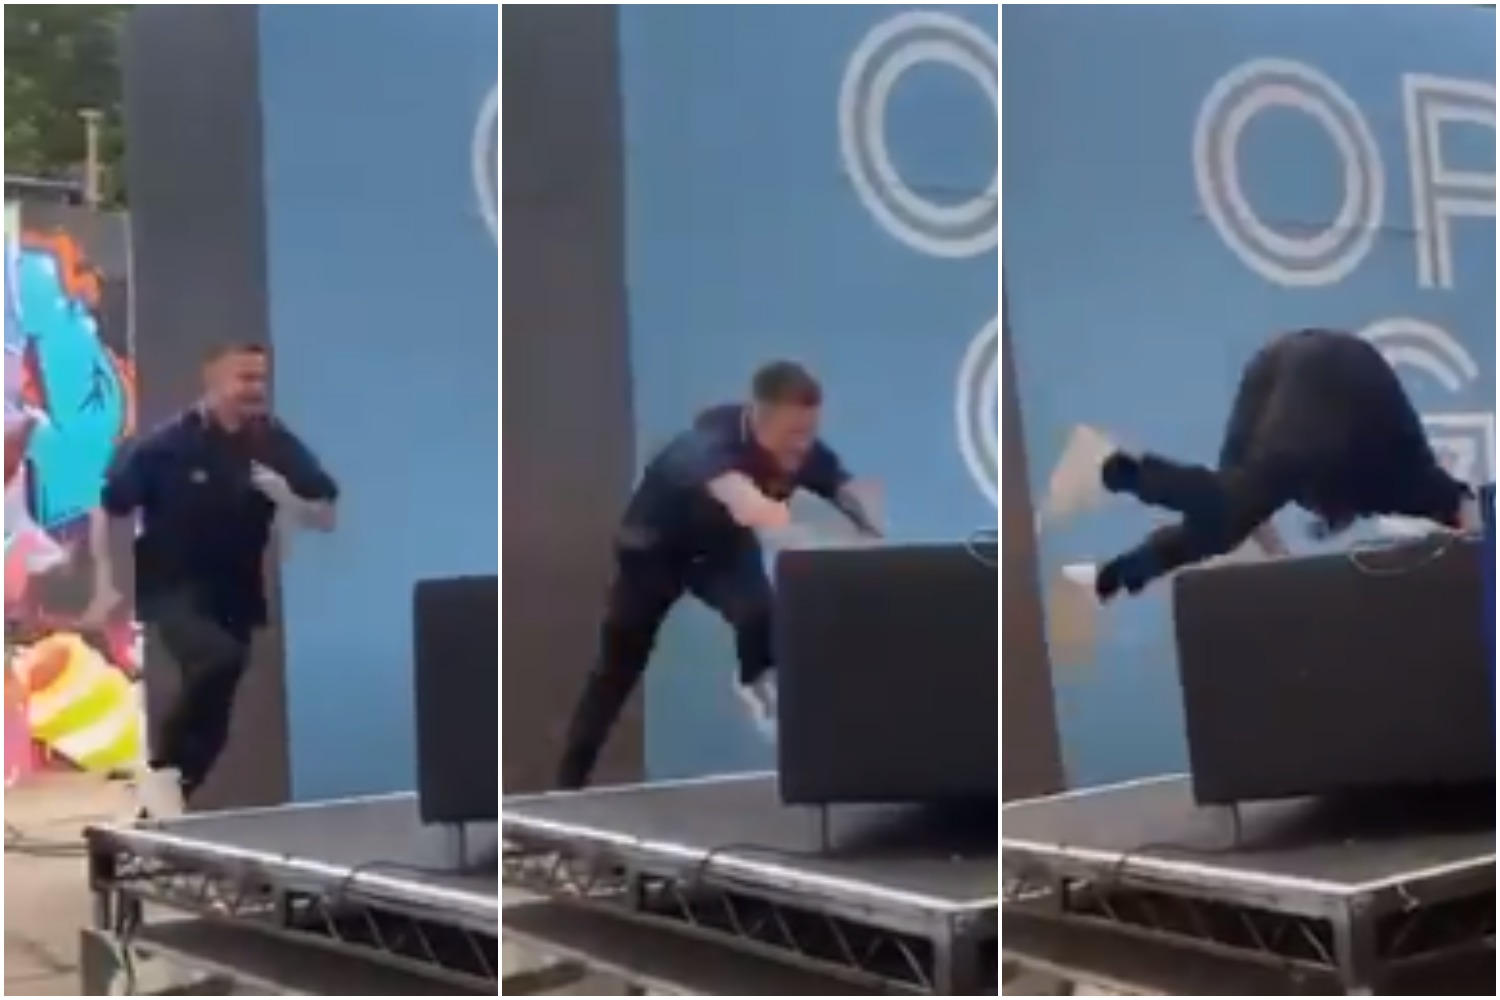 Watch: Hilarious moment Andy Halliday decks it on stage at Open Goal SWG3 show and has fans in stitches